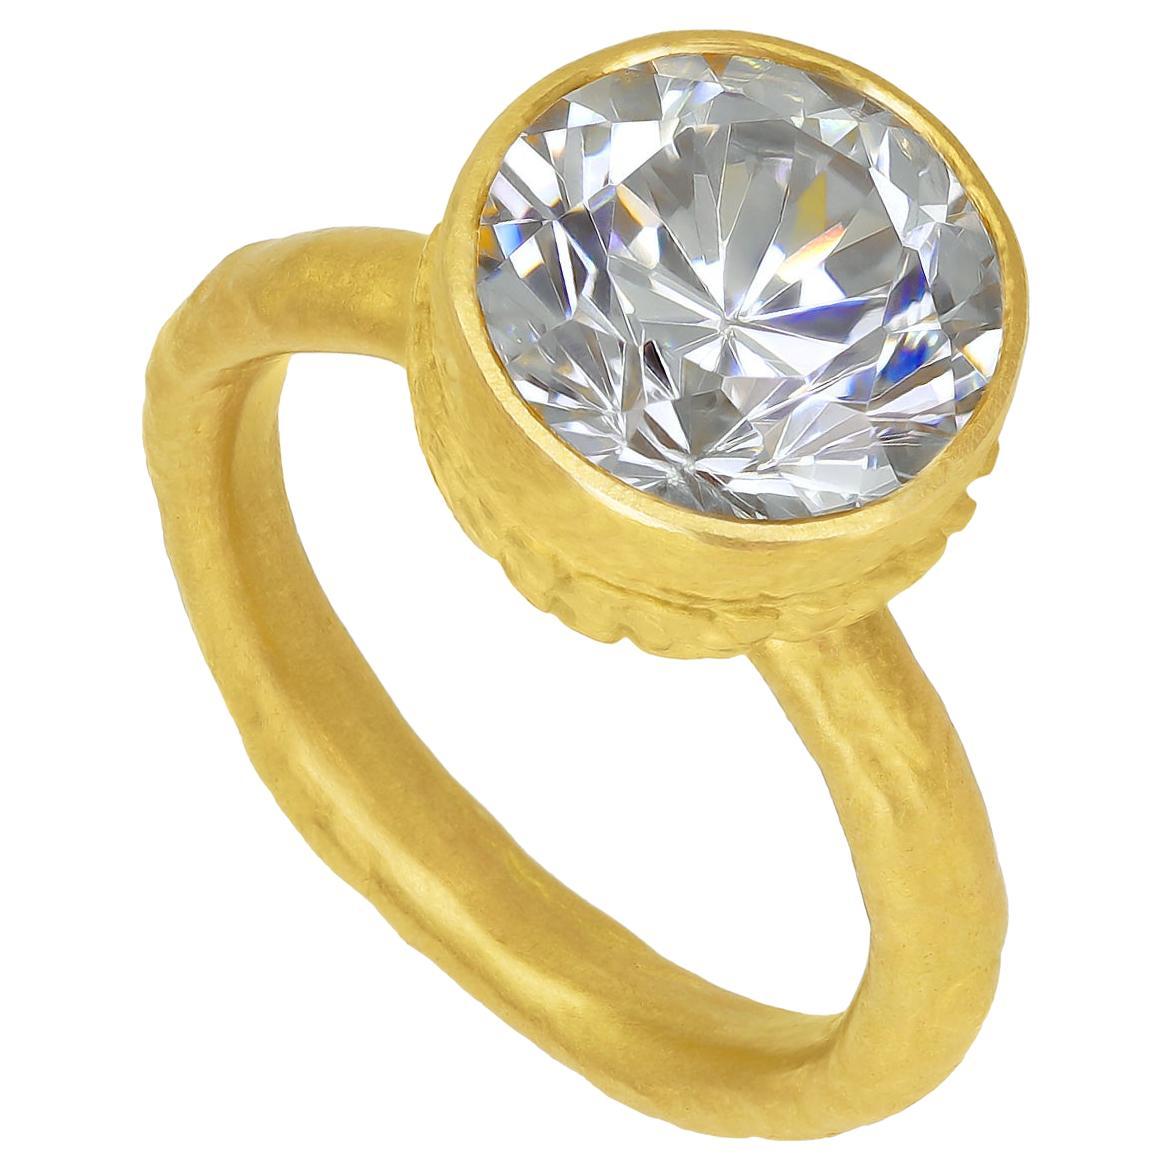 9.72ct Fiery Round White Zircon Carved Yellow Gold Solitaire Ring, Eva Steinberg For Sale